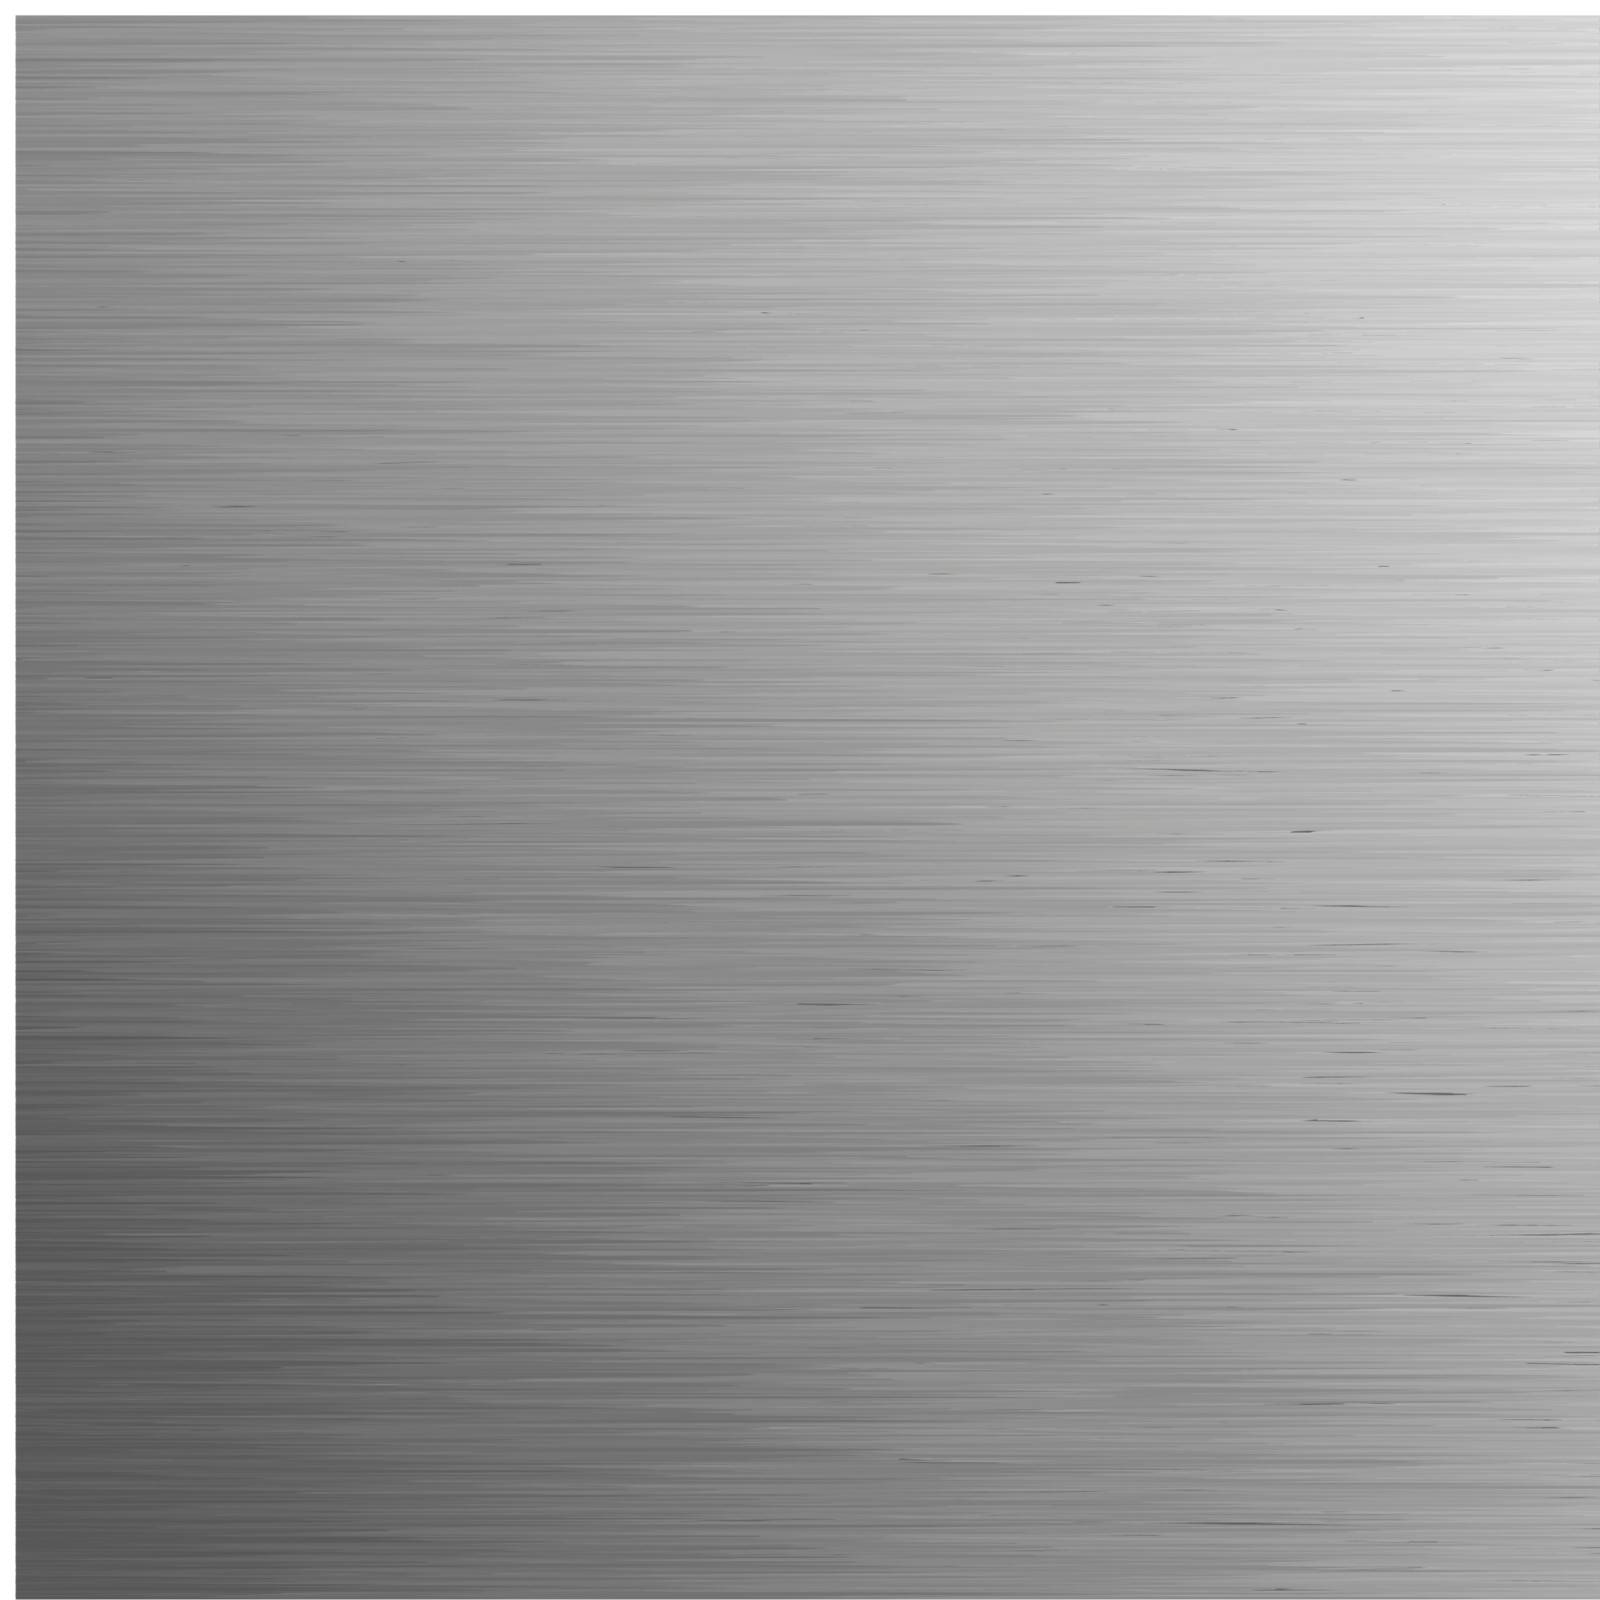 Brushed metal, template background. EPS 8 vector file included